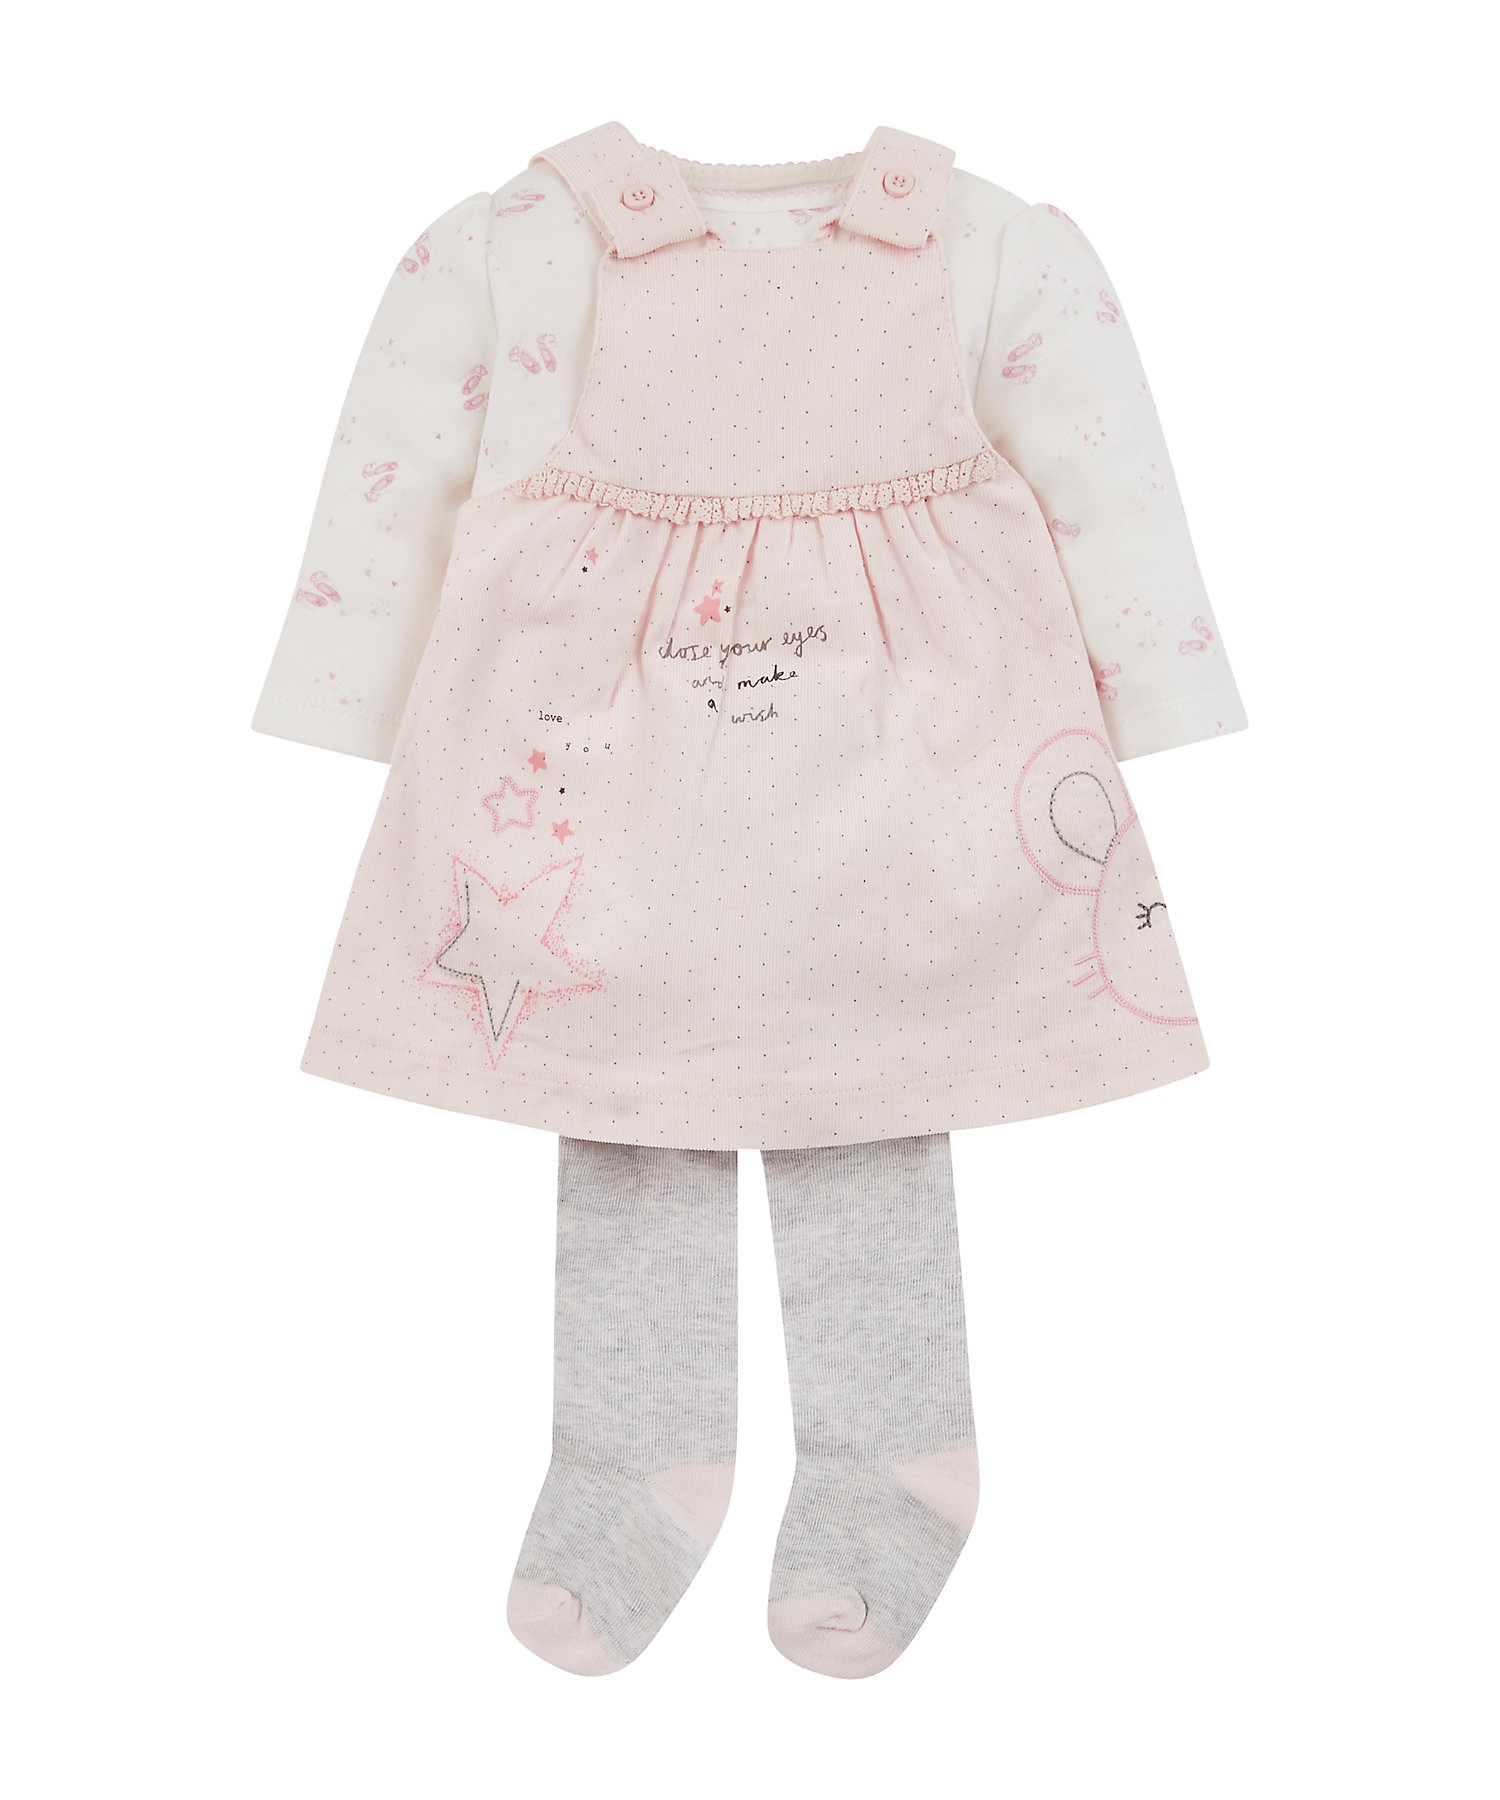 Mothercare | Girls Full Sleeves Cord Dress, Bodysuit And Tights Set Star Embroidery - Pink